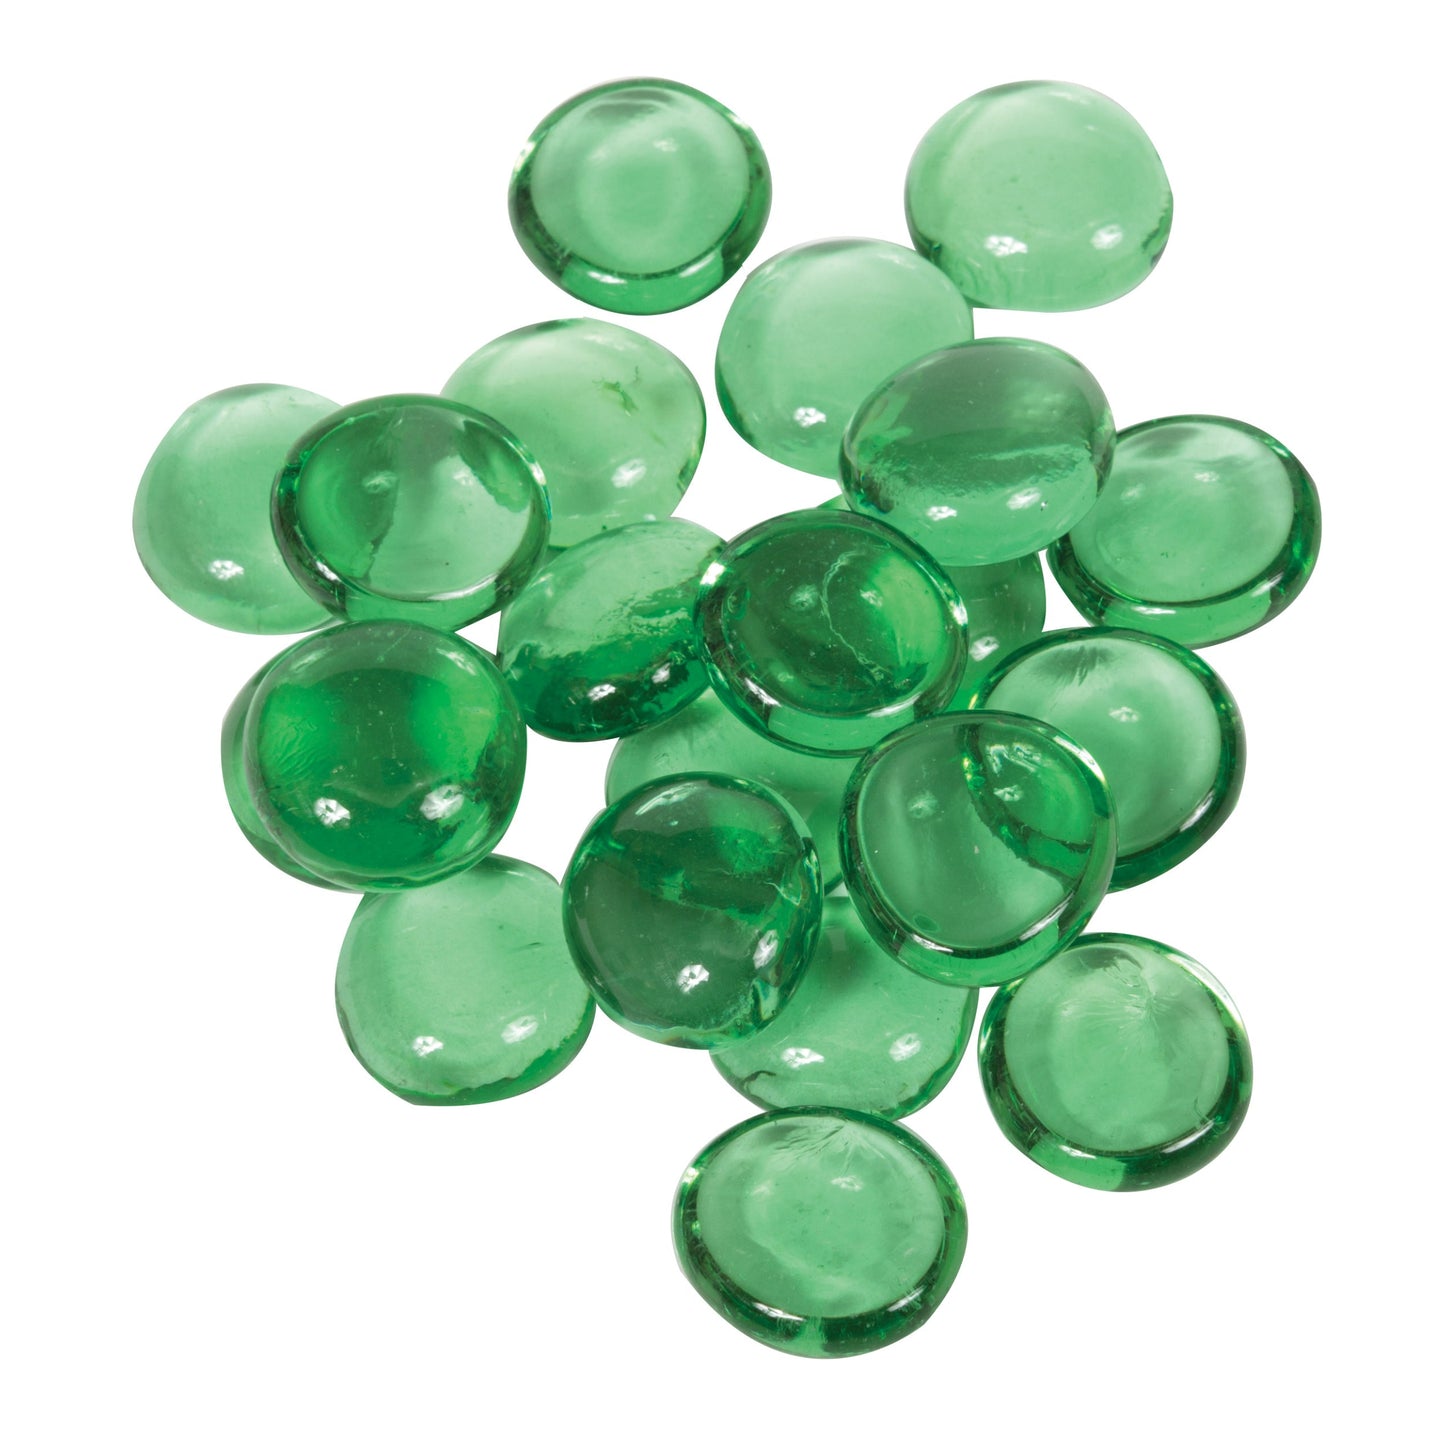 Tempered Glass Fire Beads 3/4" Size